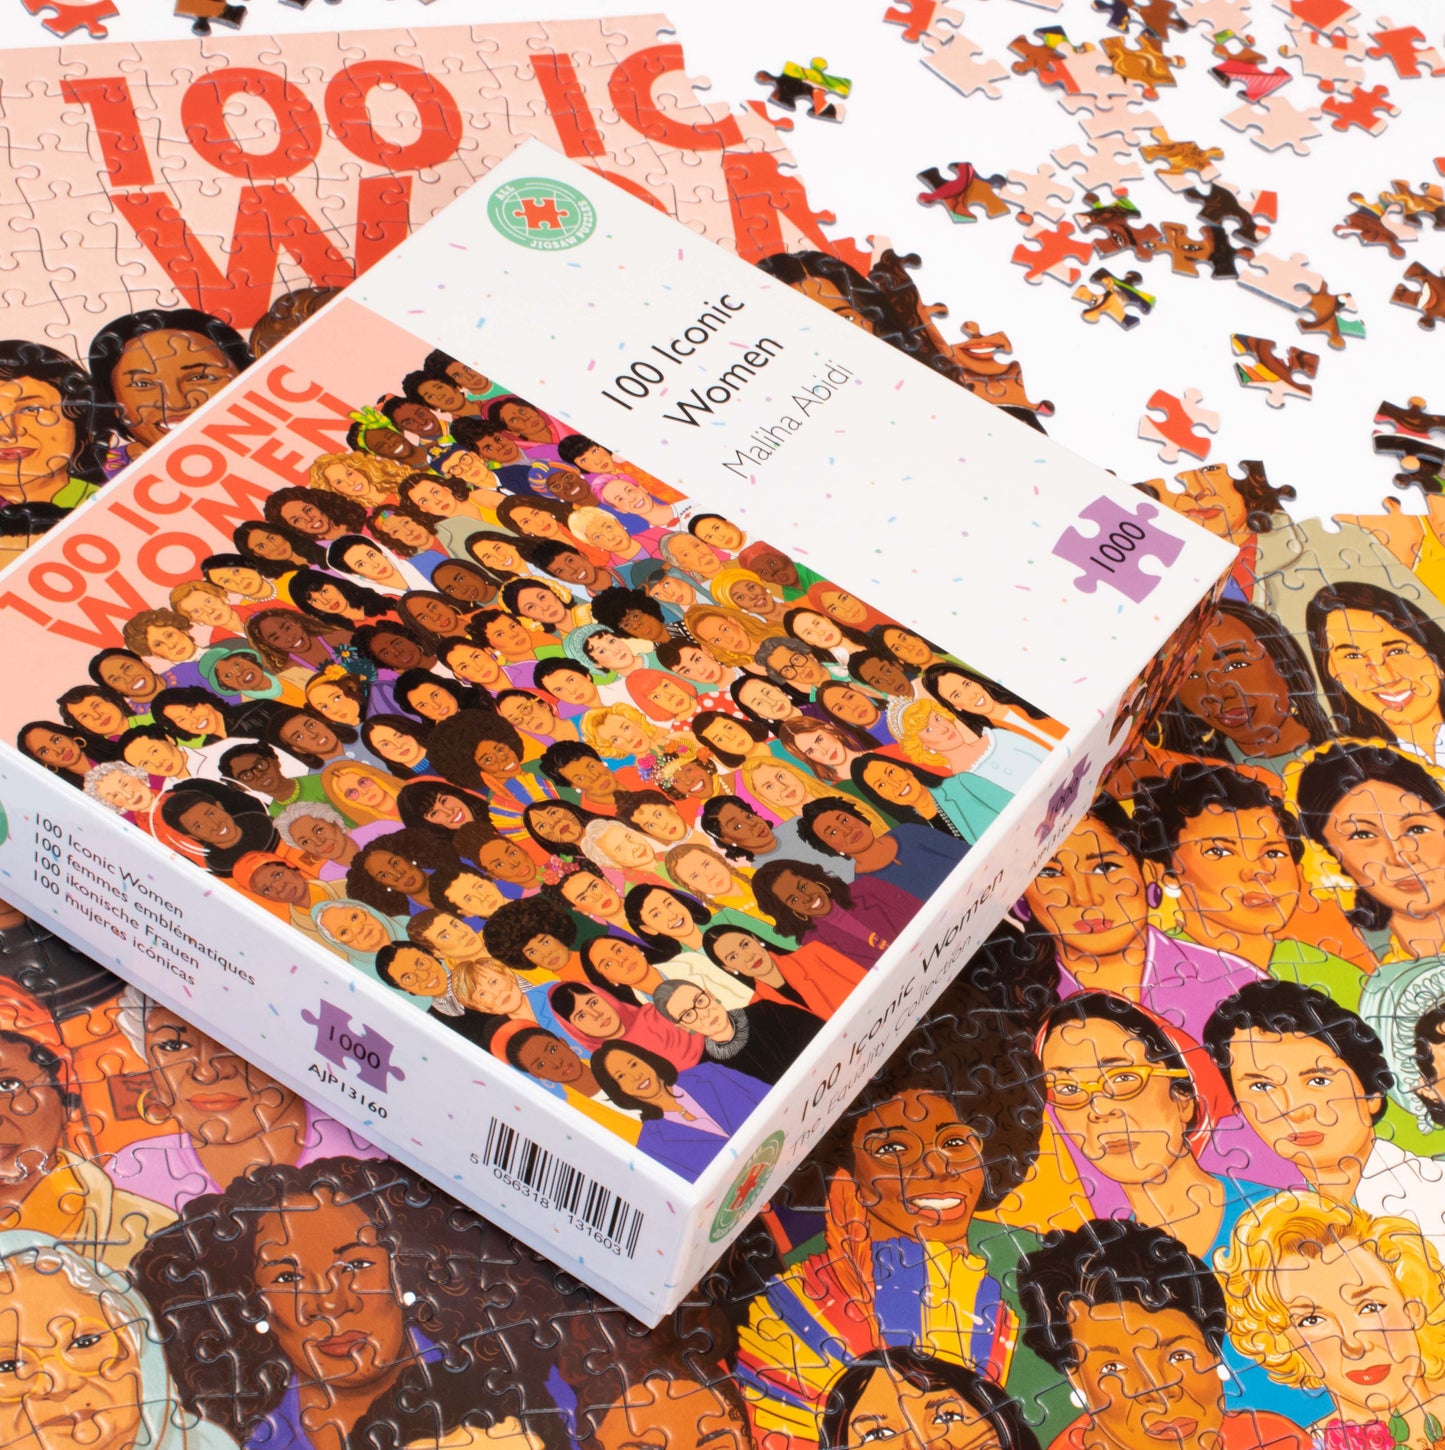 100 Iconic Women - 500 or 1000 Piece Jigsaw Puzzle